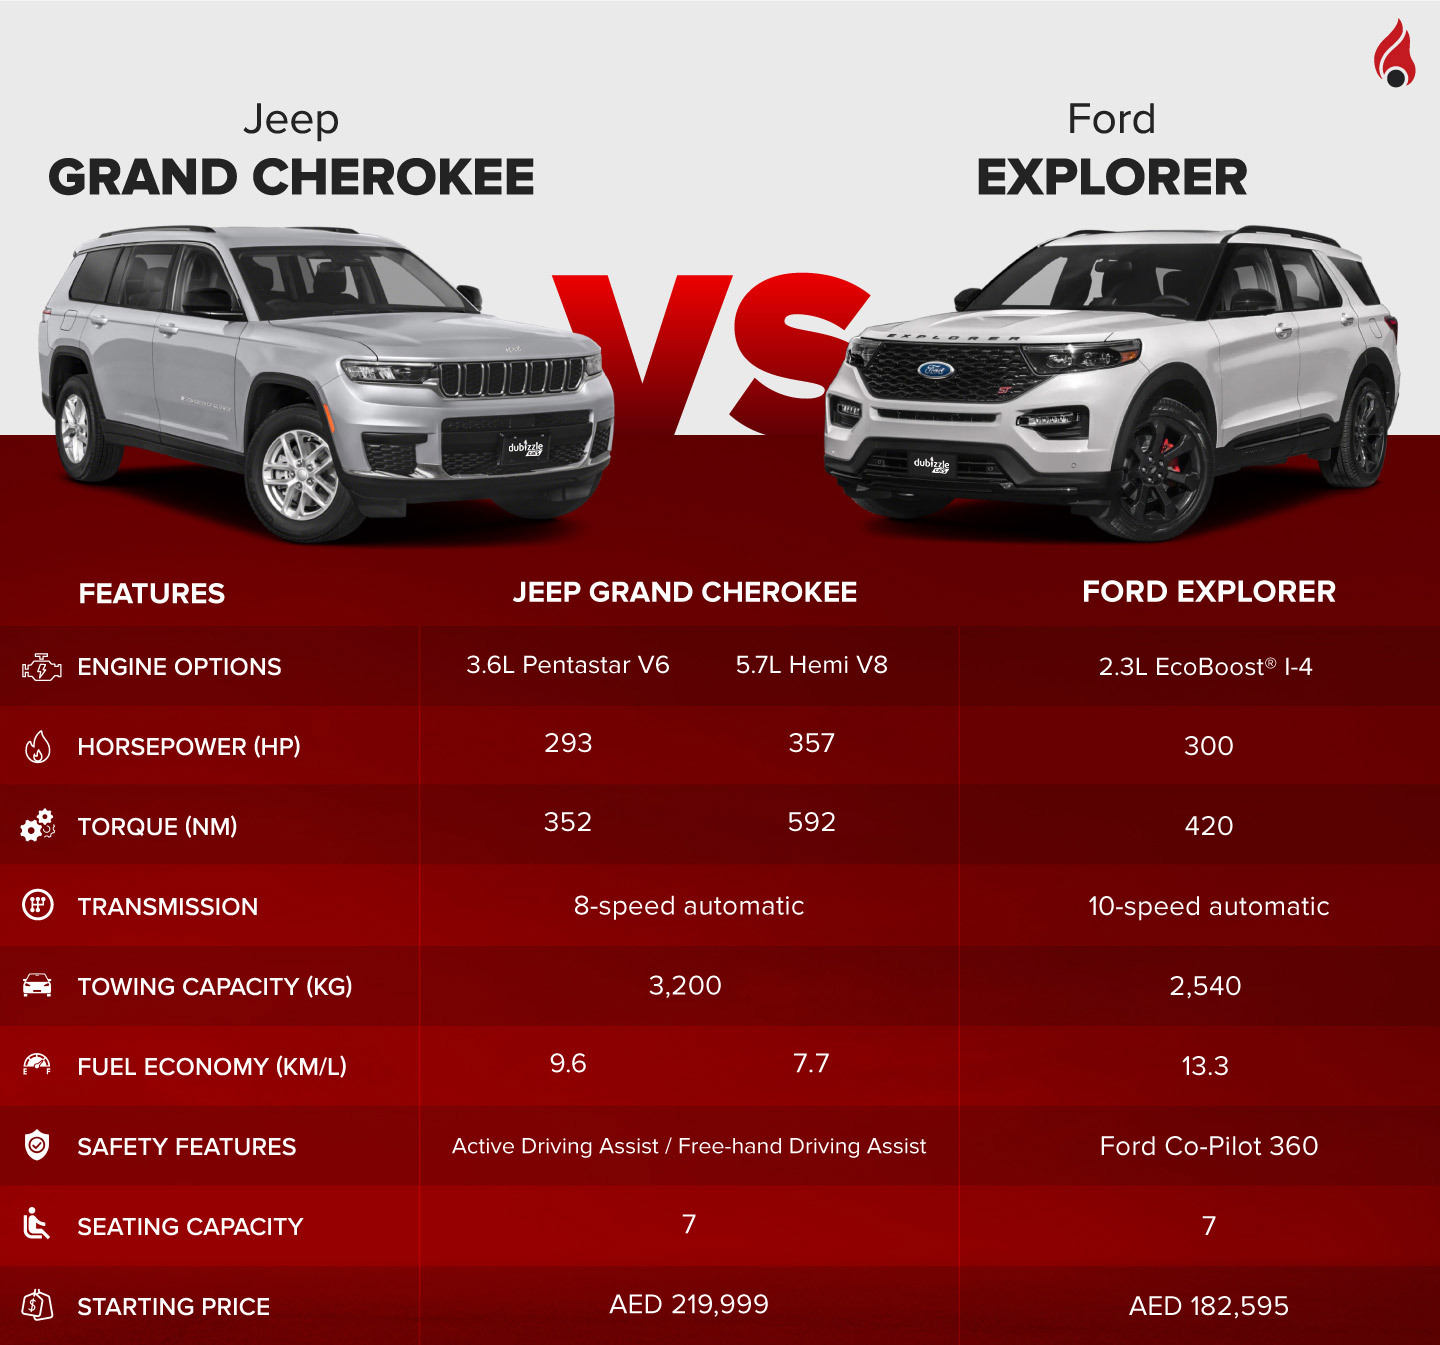 Features of Jeep Grand Cherokee and Ford Explorer